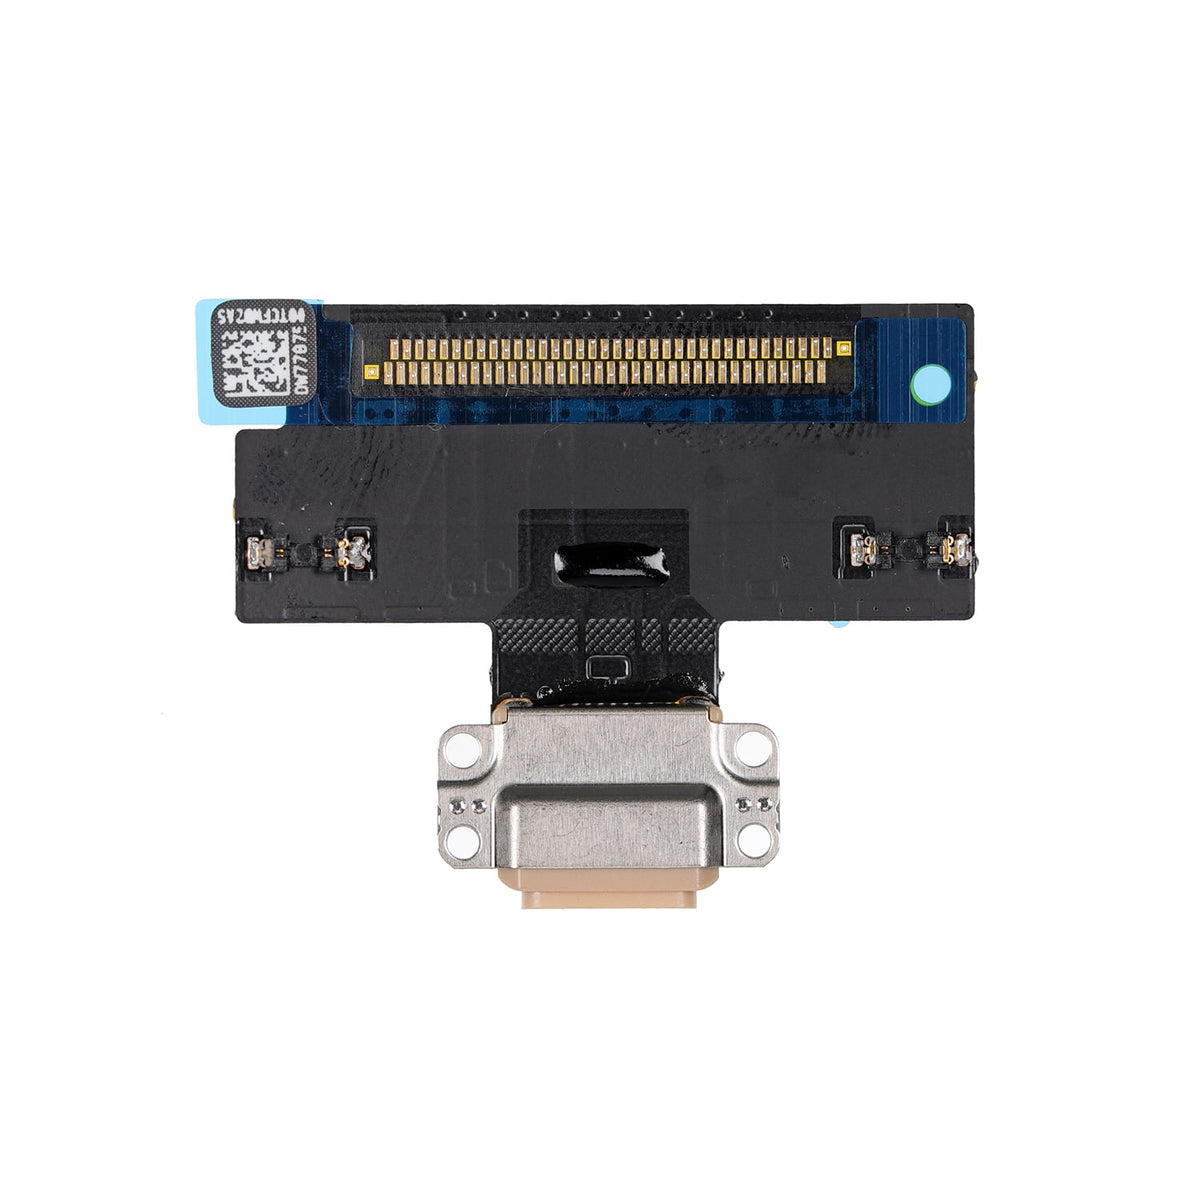 ROSE GOLD CHARGING CONNECTOR FLEX CABLE FOR IPAD AIR 3